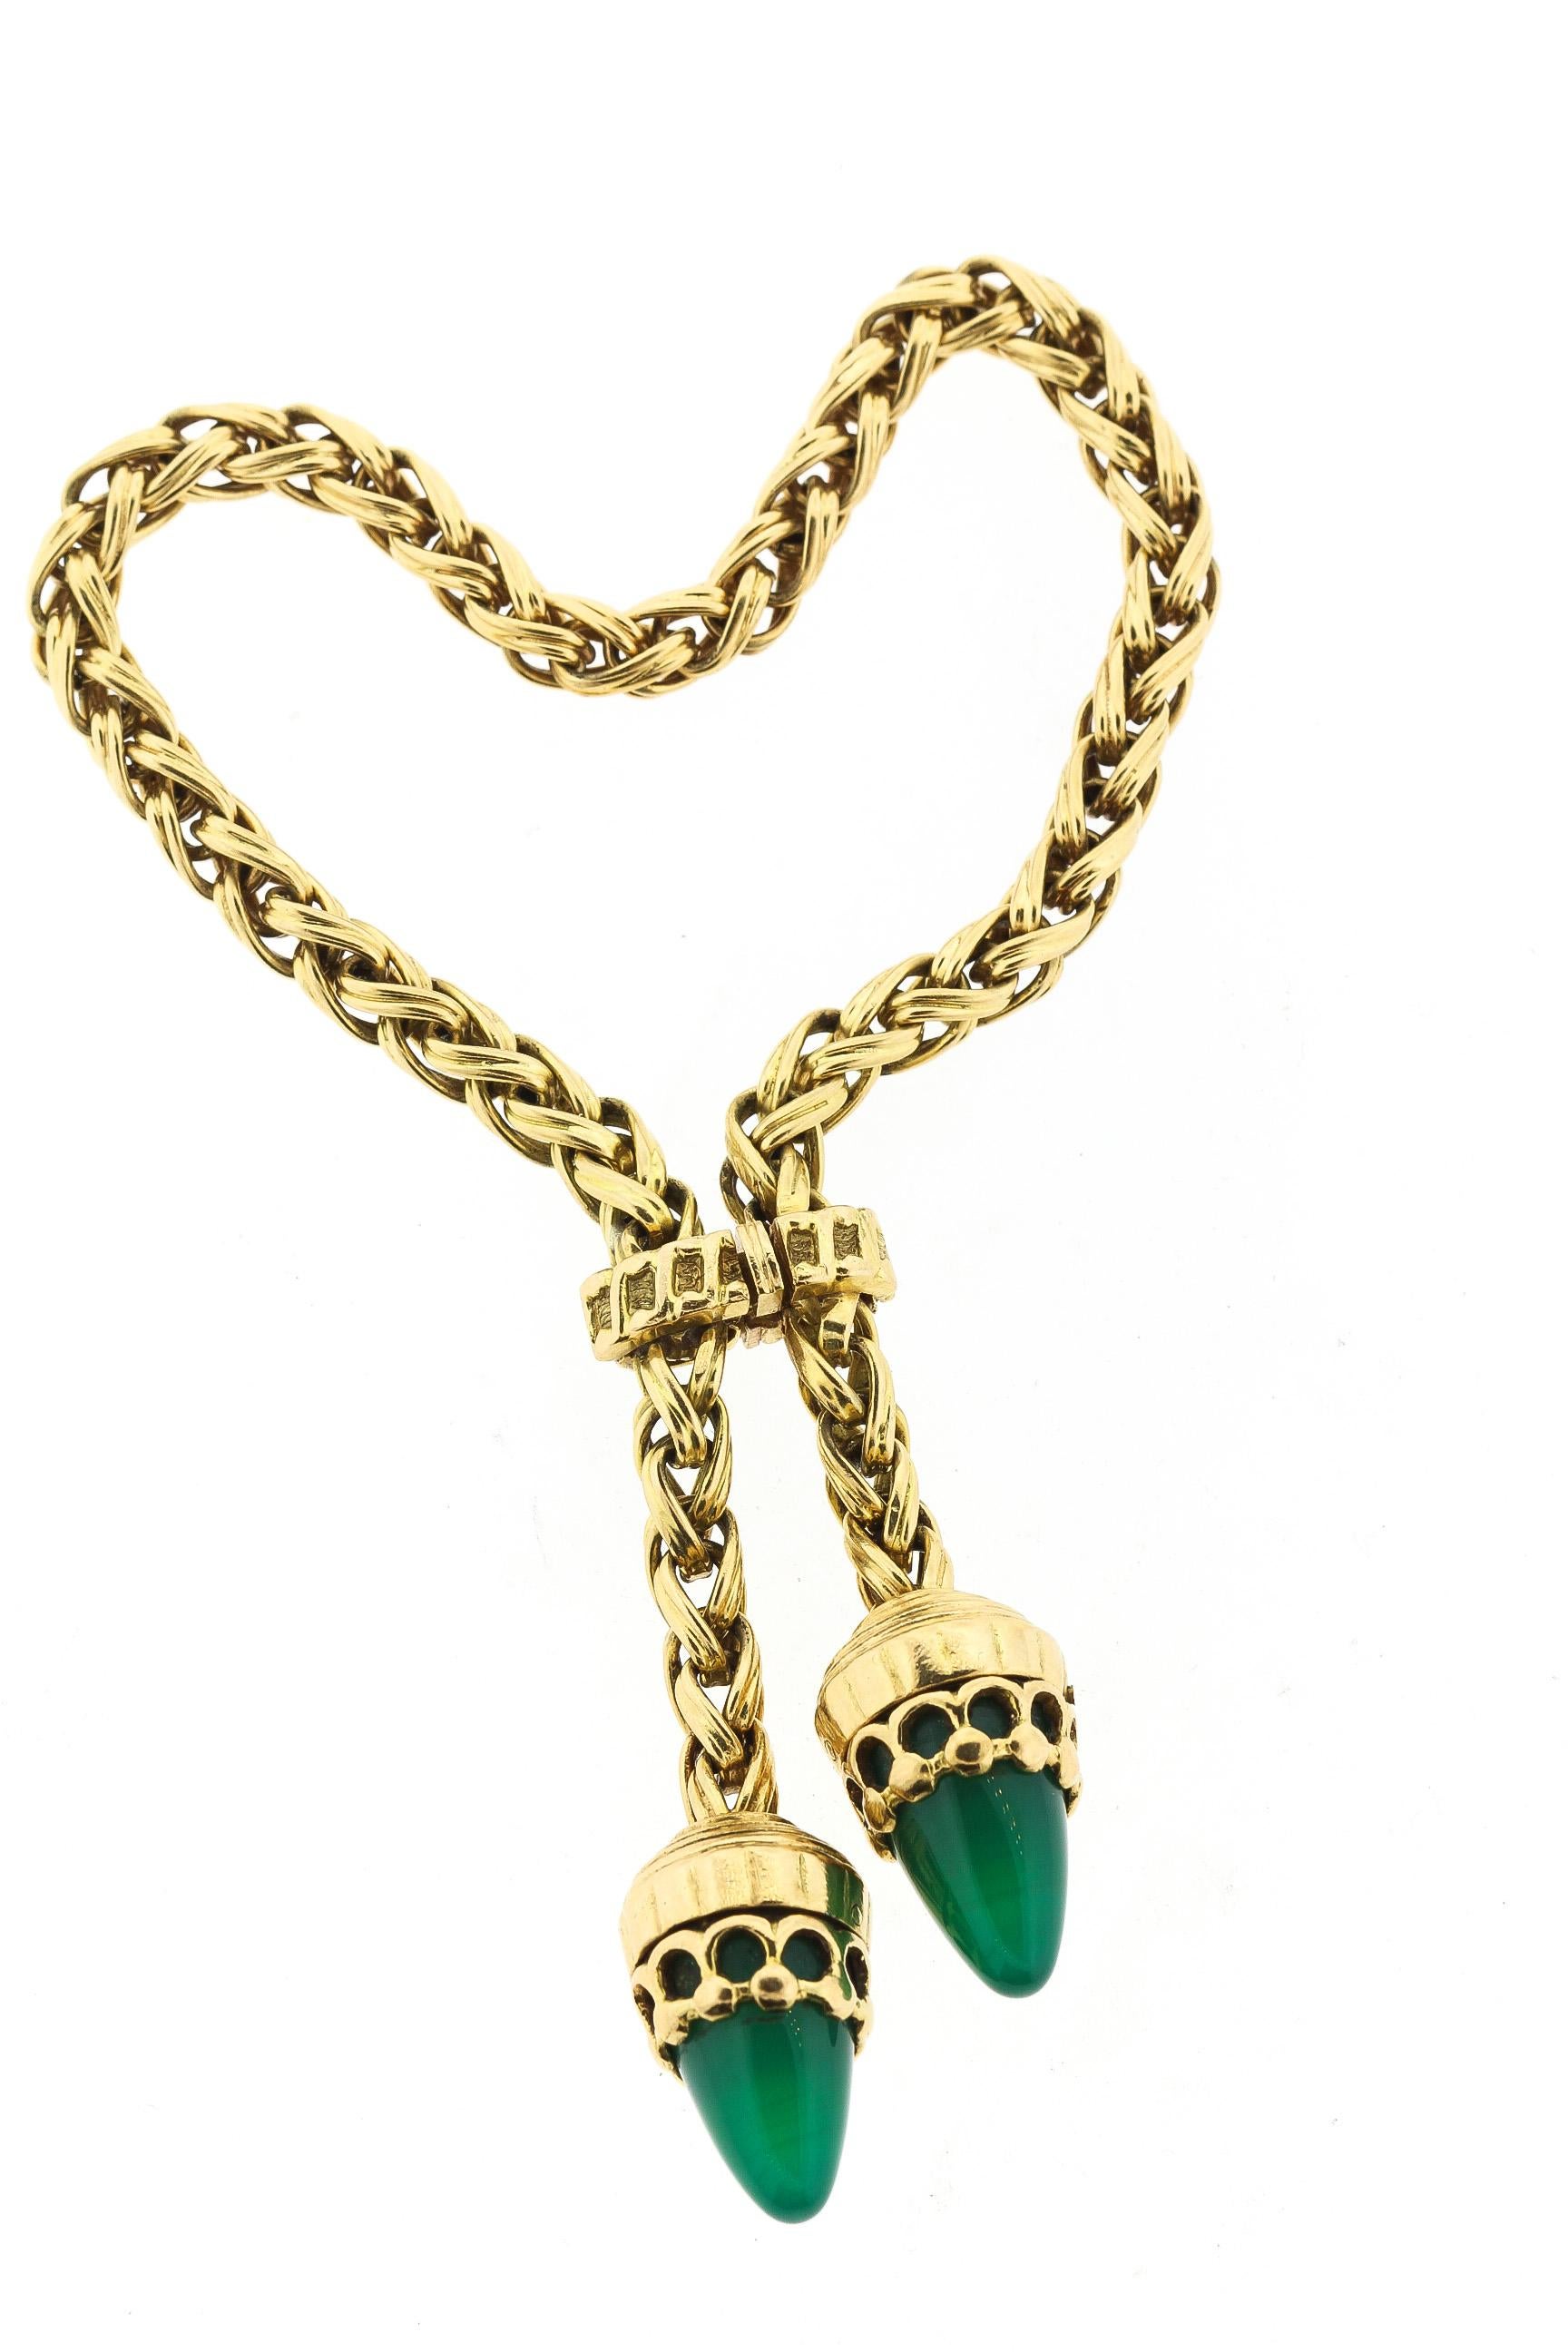 A chic vintage 18k yellow gold woven rope tassel bracelet suspending two dart shaped chalcedony, circa 1960. This unique design clasps around the hand and dangles the two green stones. The woven gold is of beautiful construction. The bracelet